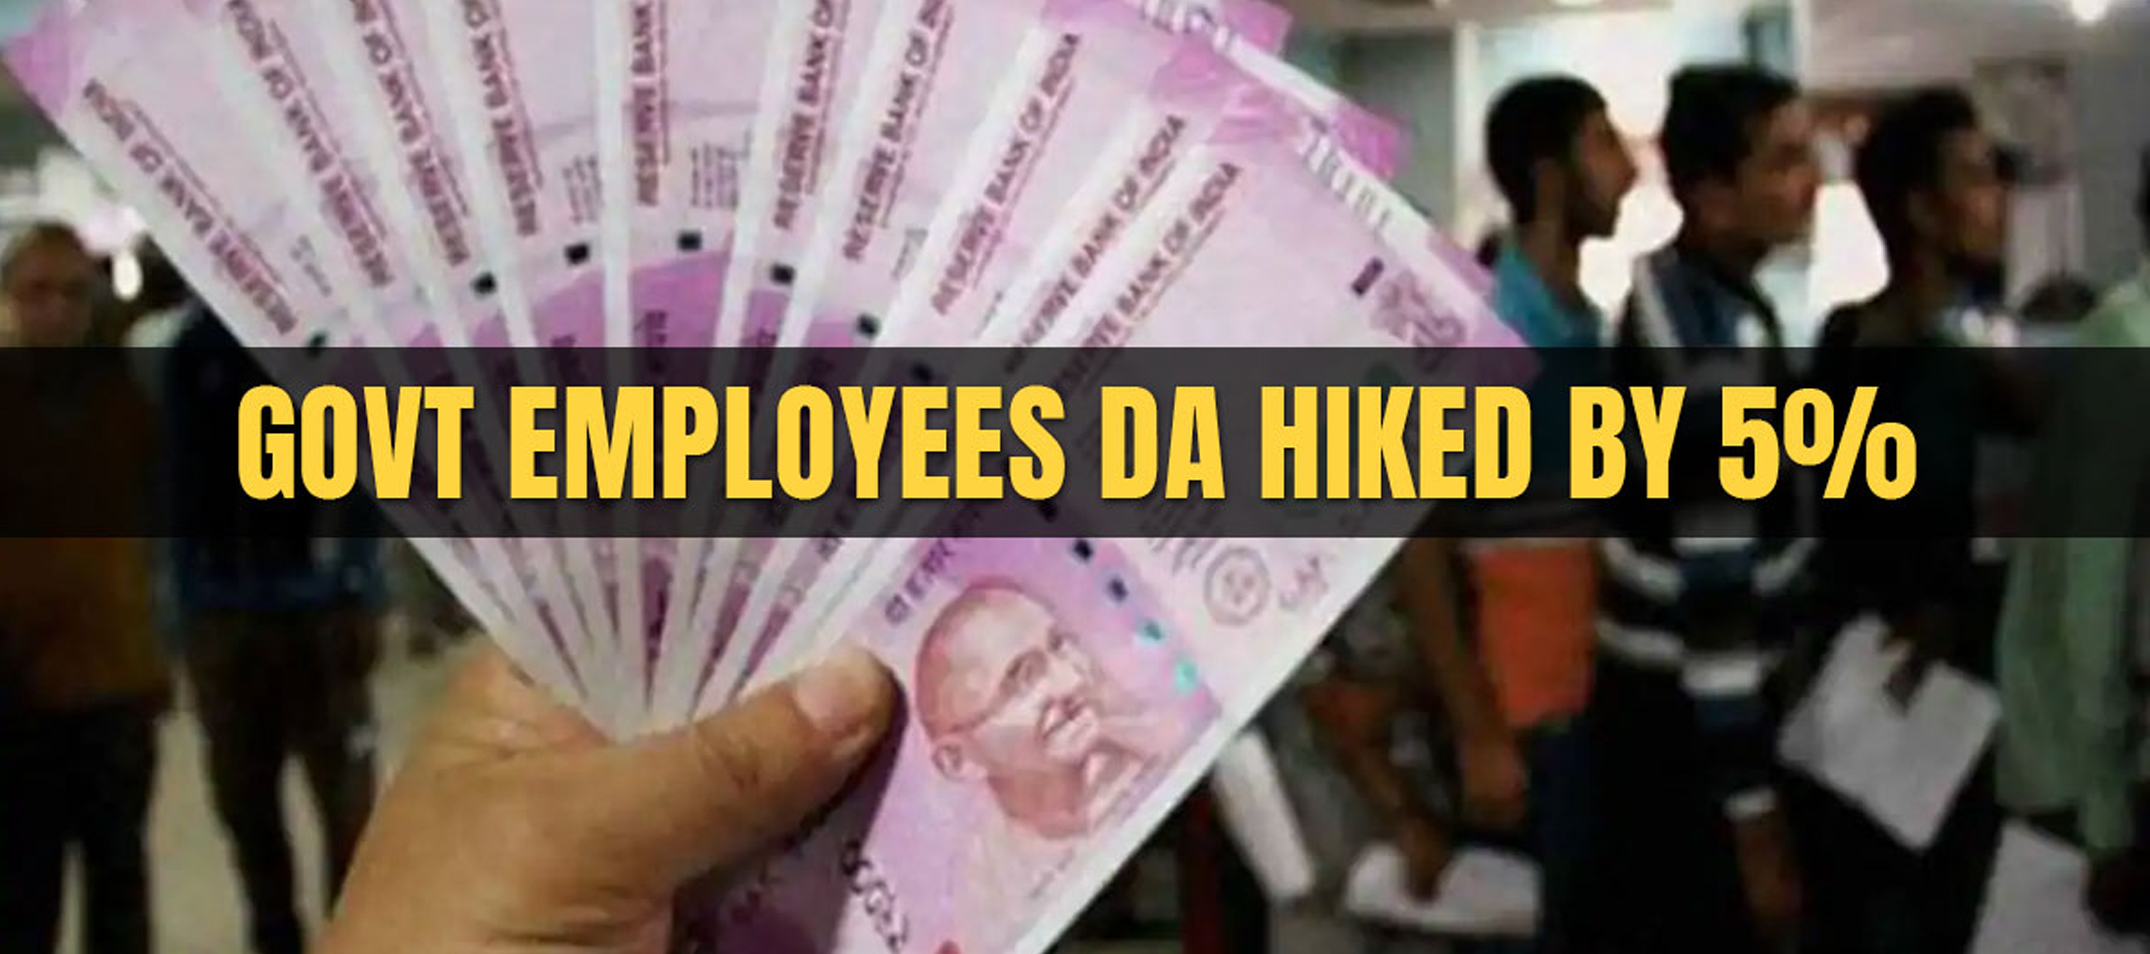 Cabinet approves 5% hike in DA for central govt employees